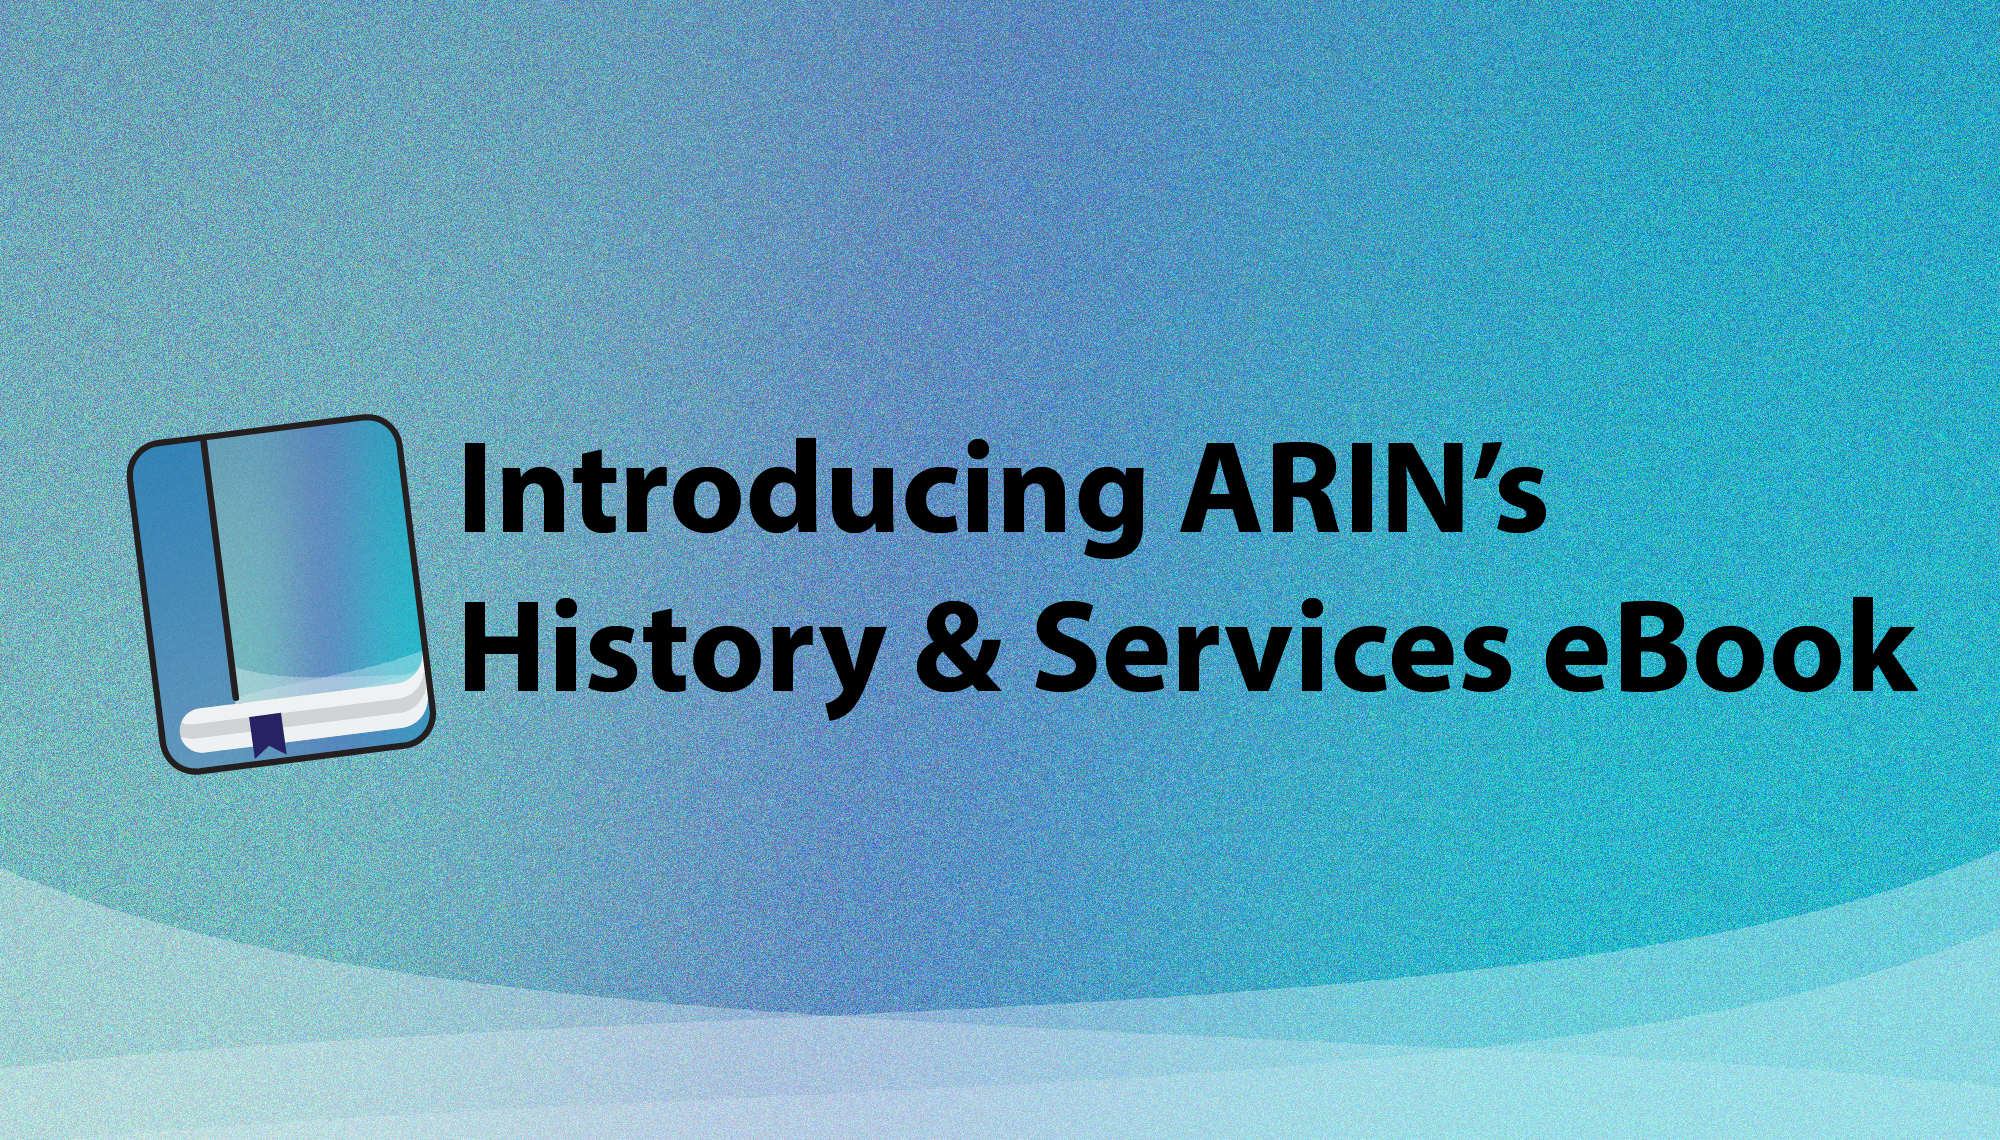 Introducing ARIN's History & Services eBook!